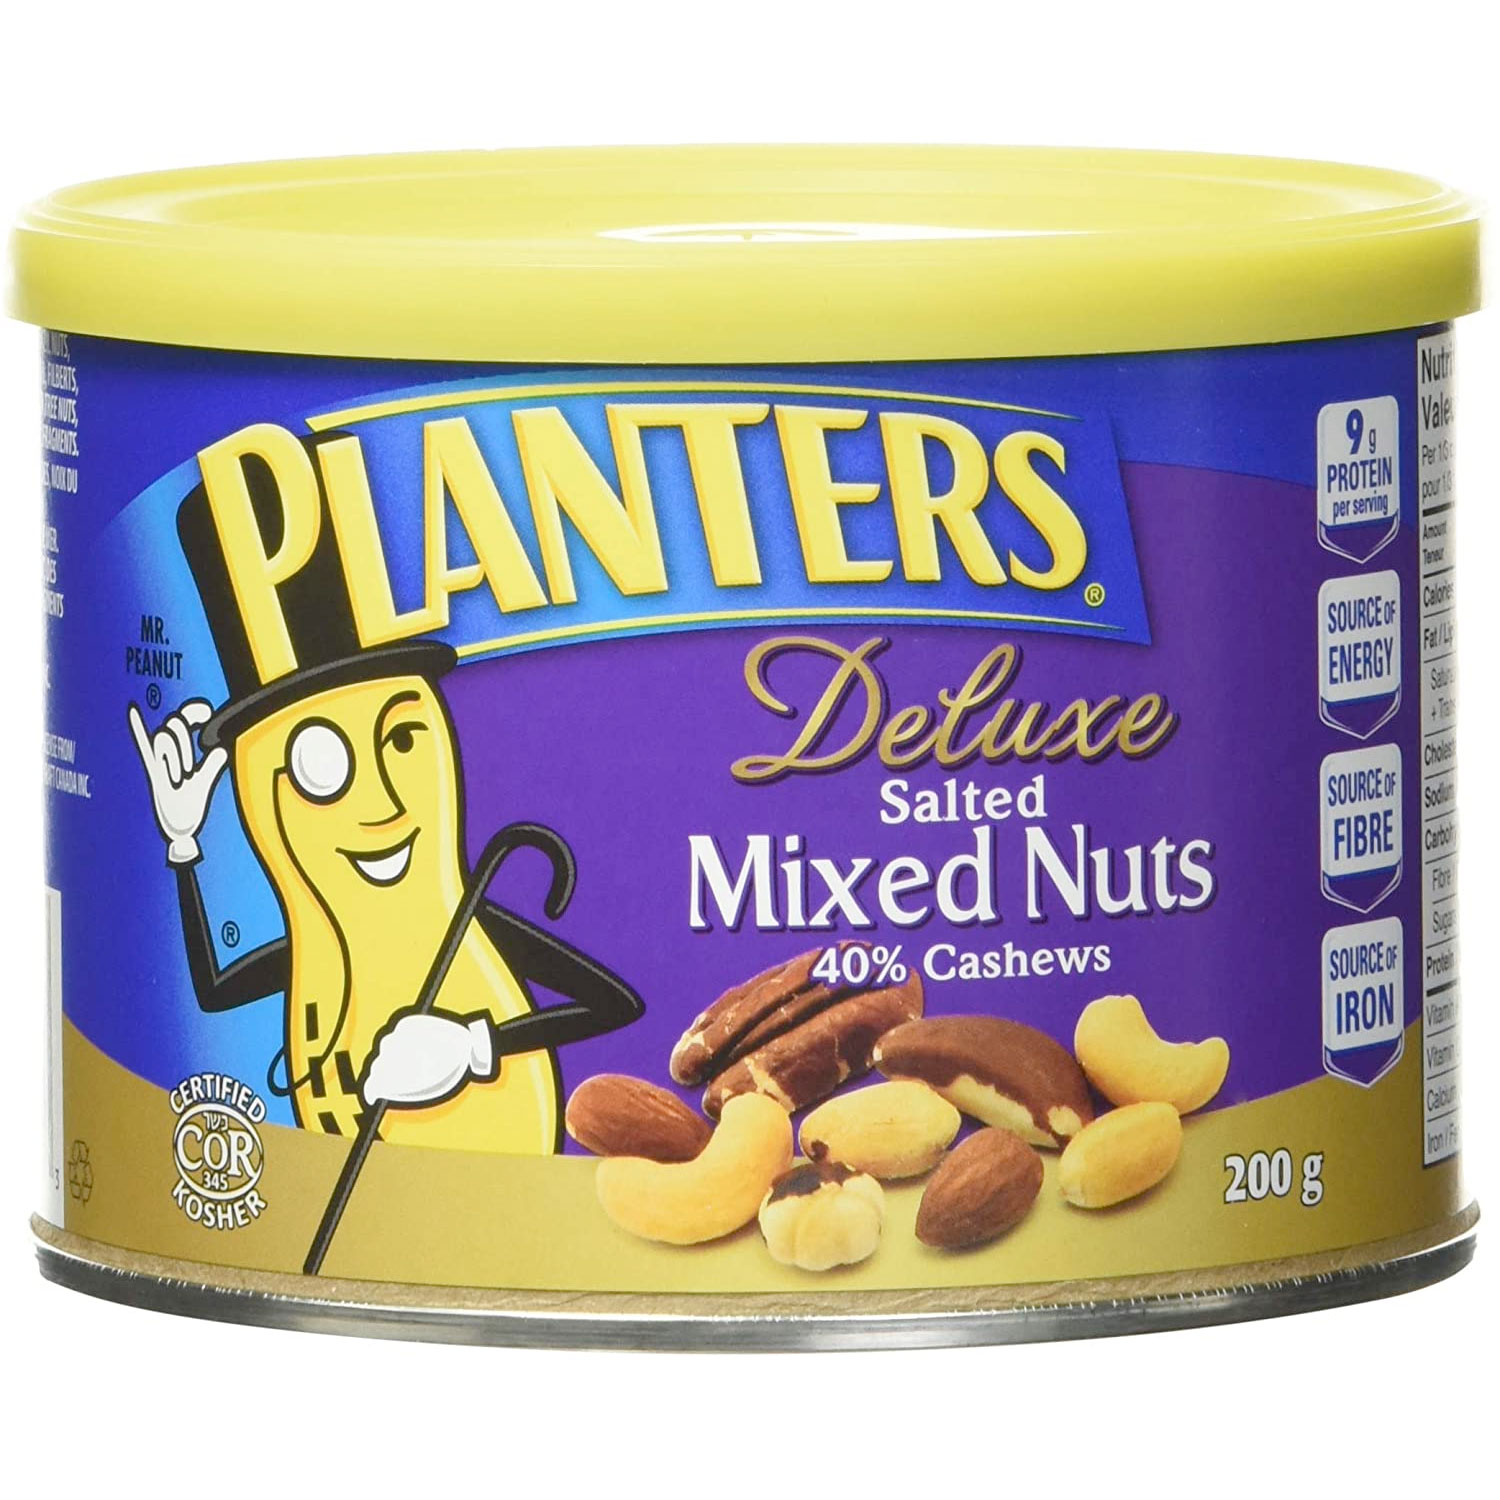 Amazon：Planters Deluxe Mix Nuts (200g)只卖$3.49